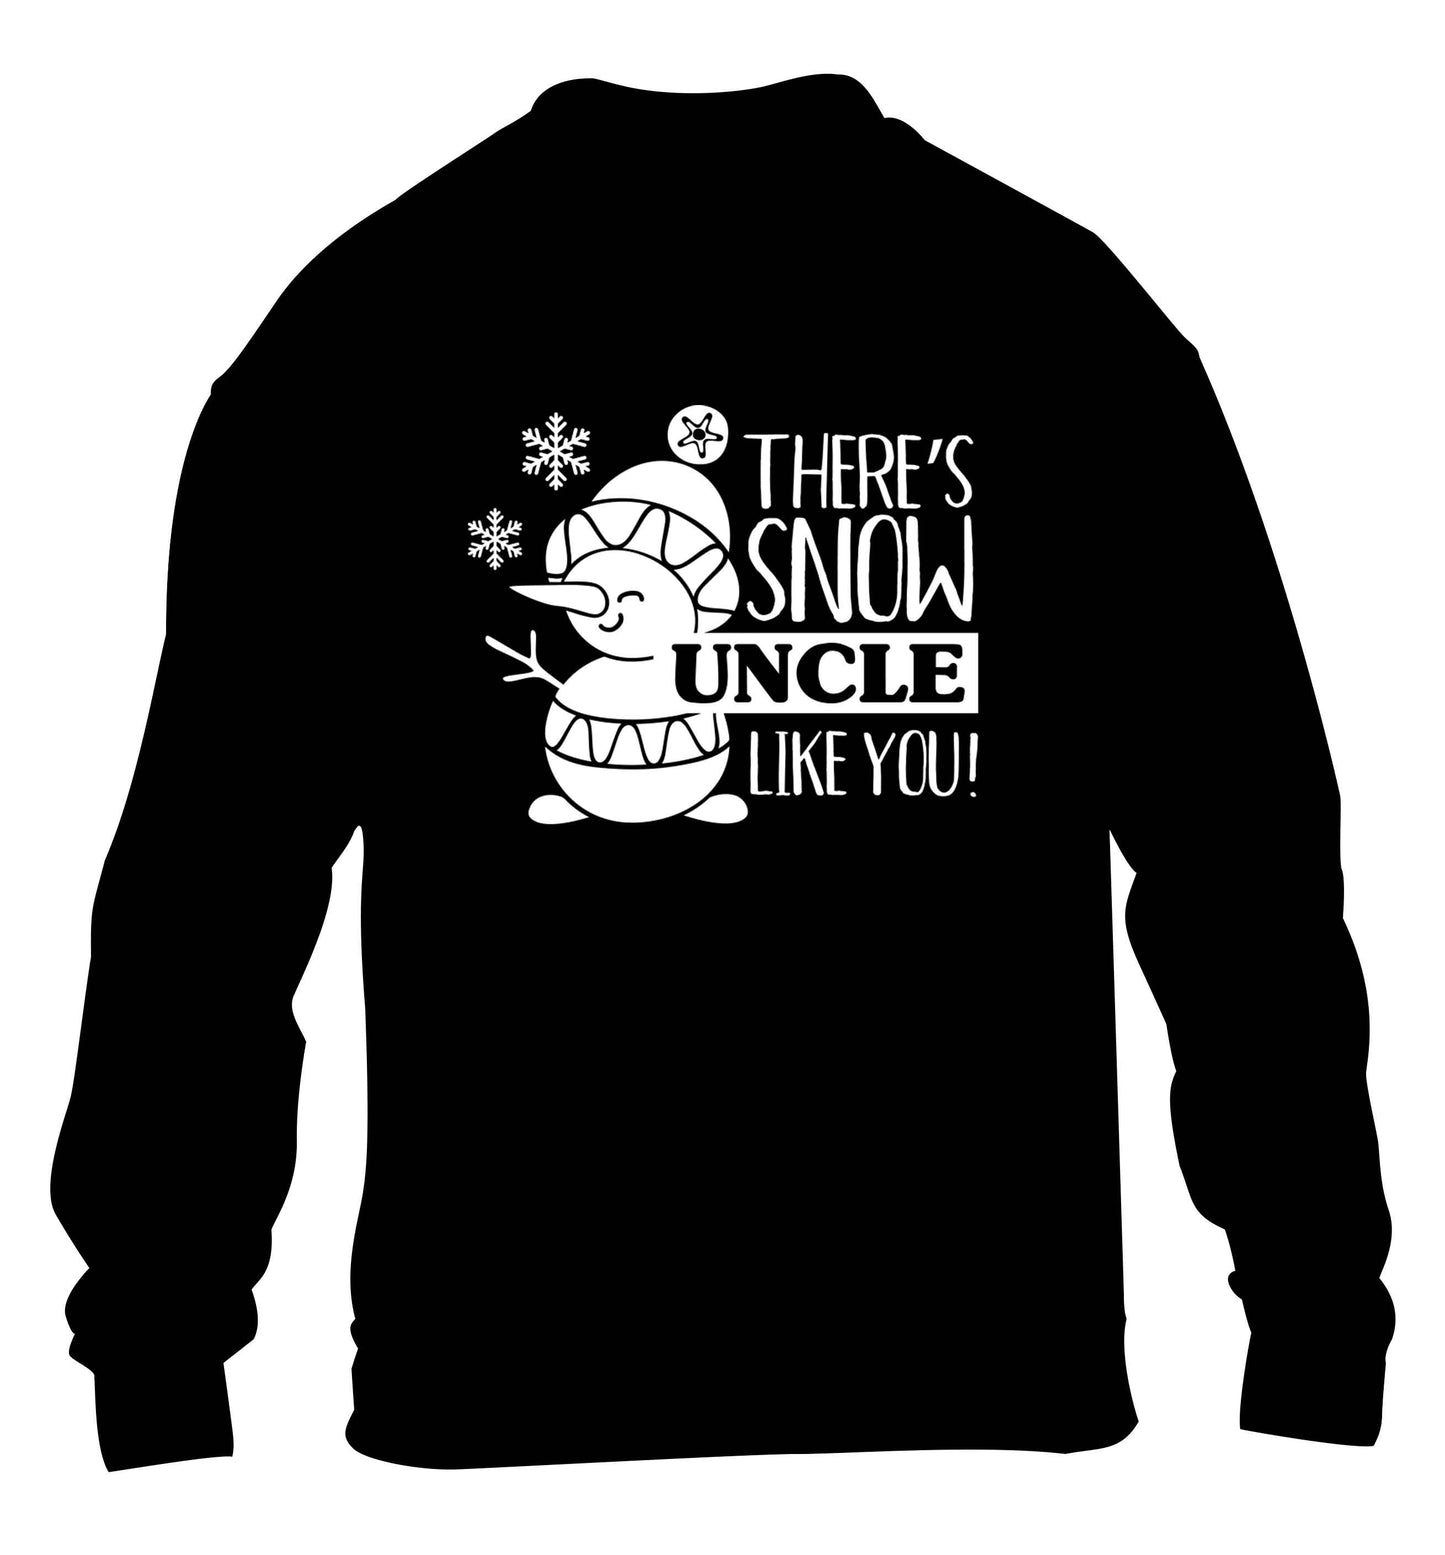 There's snow uncle like you children's black sweater 12-13 Years